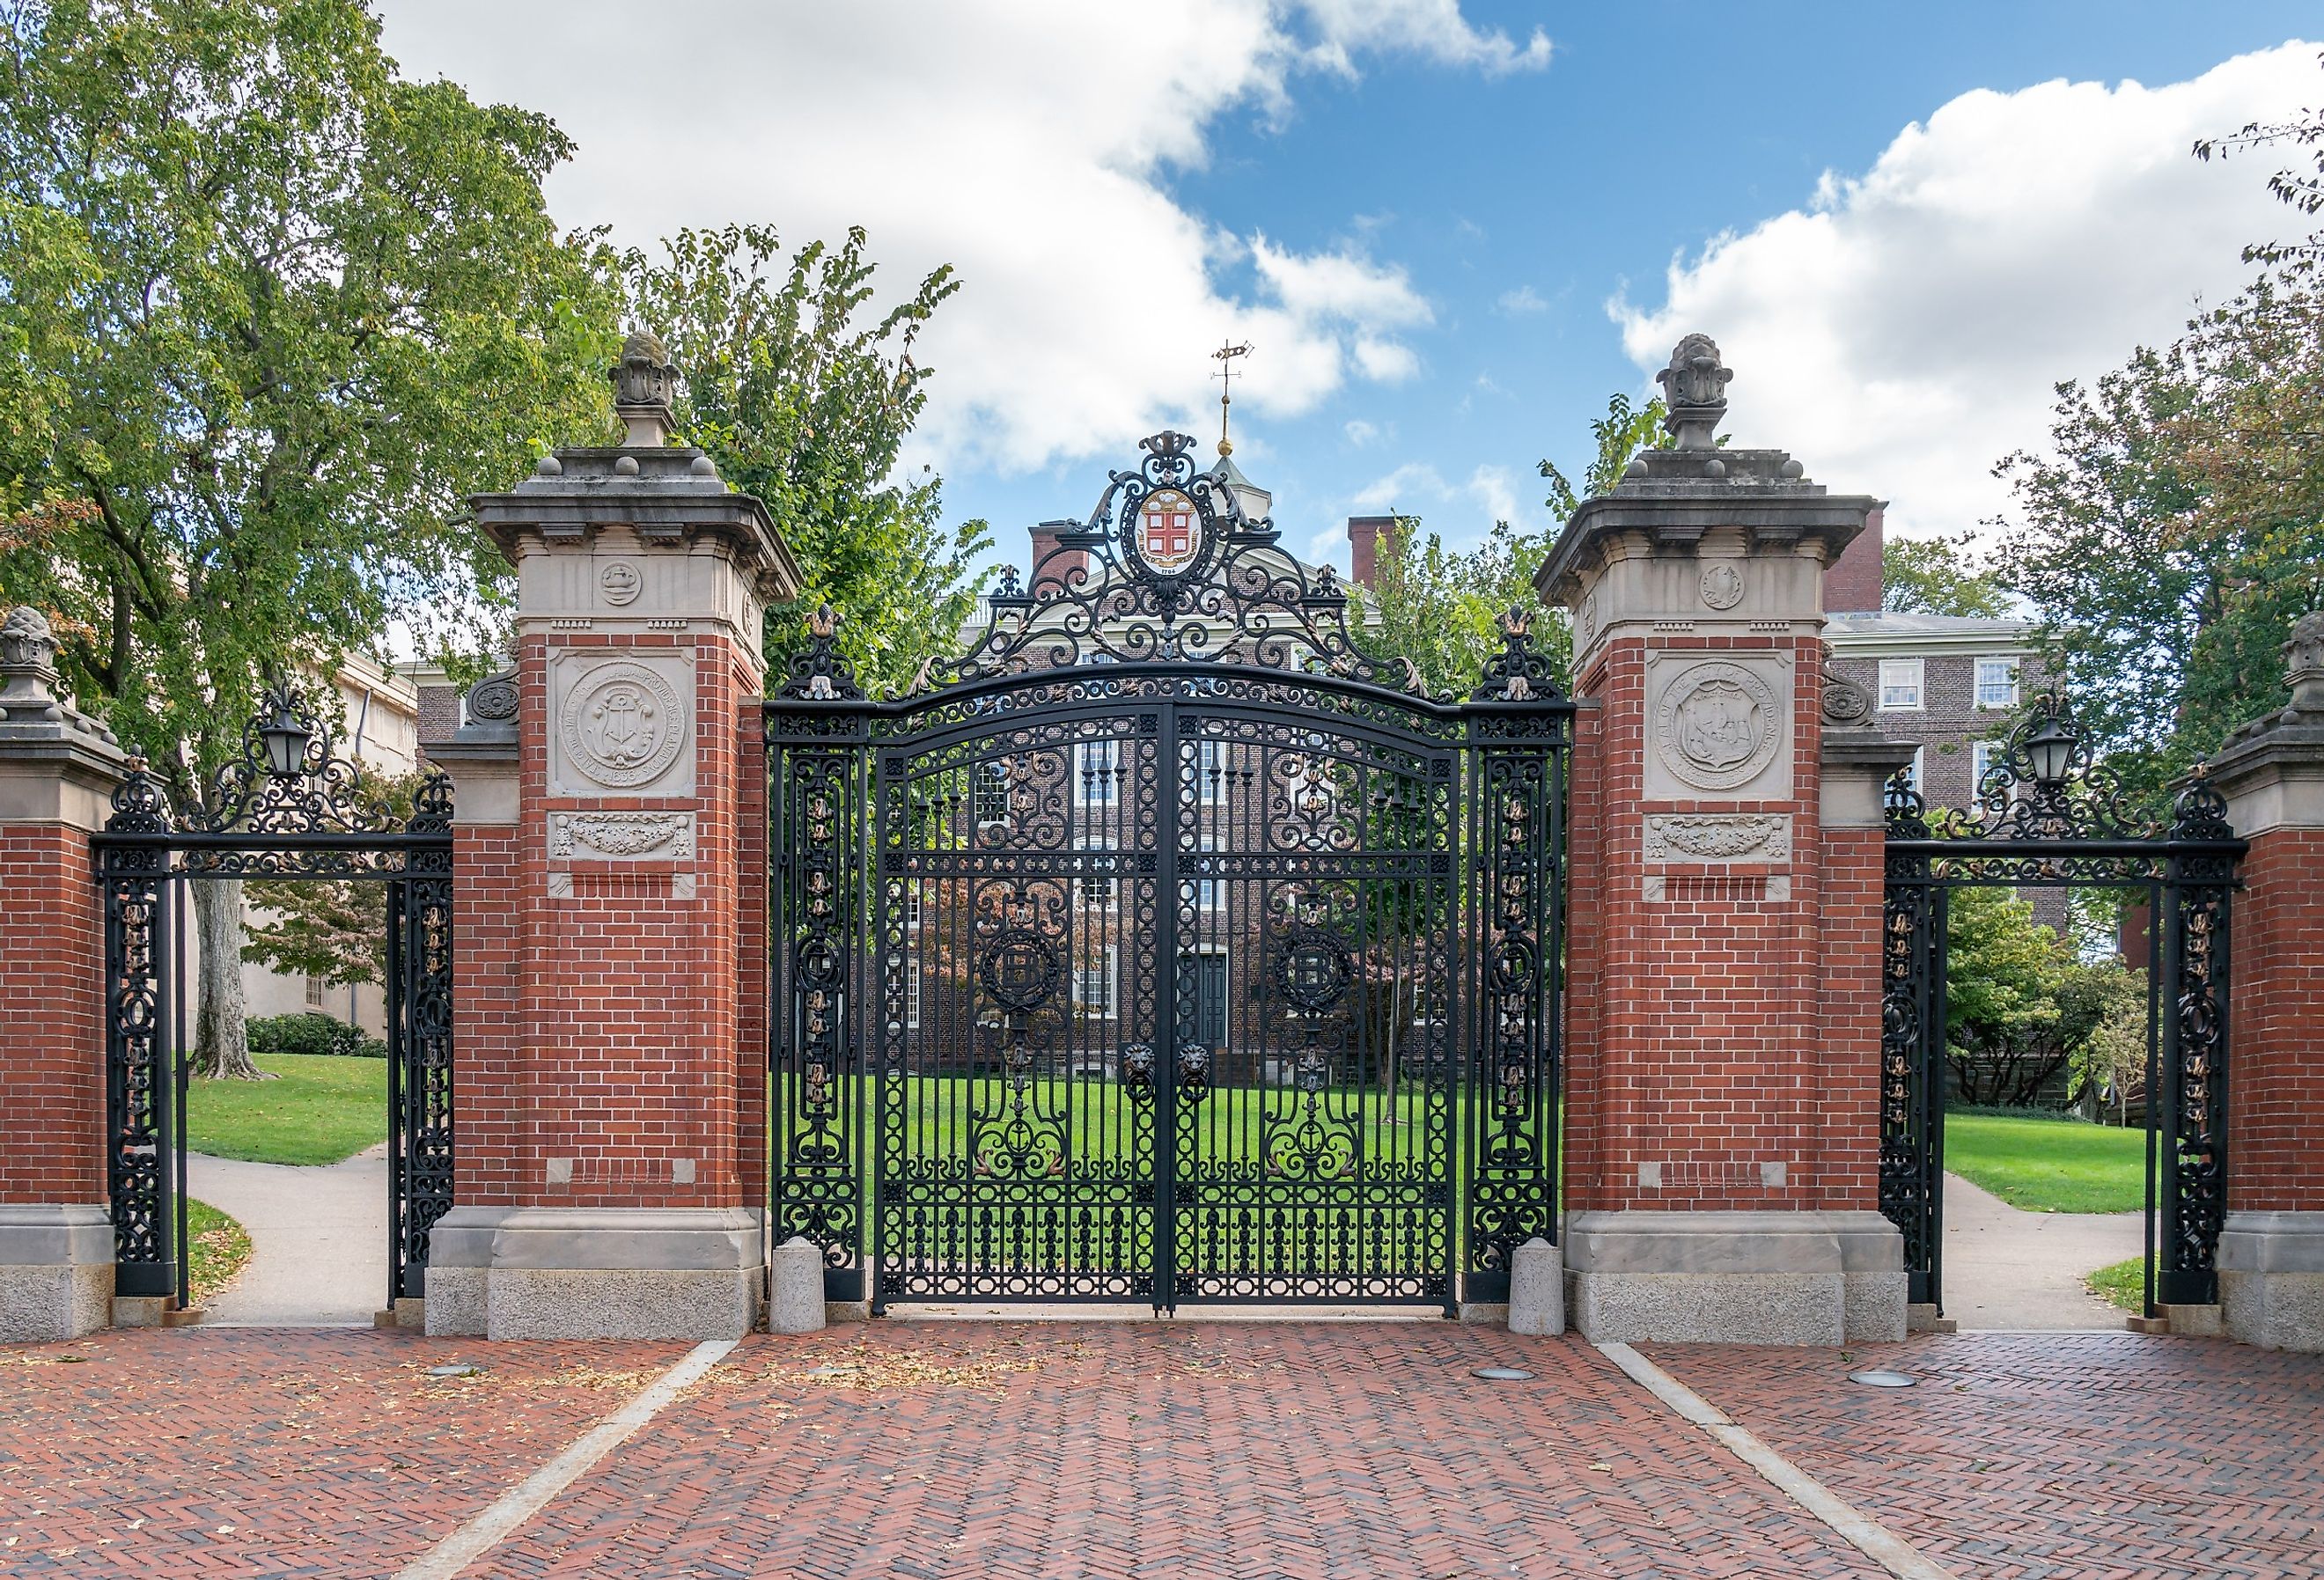 Van Wickle Gates at the campus of Brown University in Providence, Rhode Island. Image credit wolterke via AdobeStock.